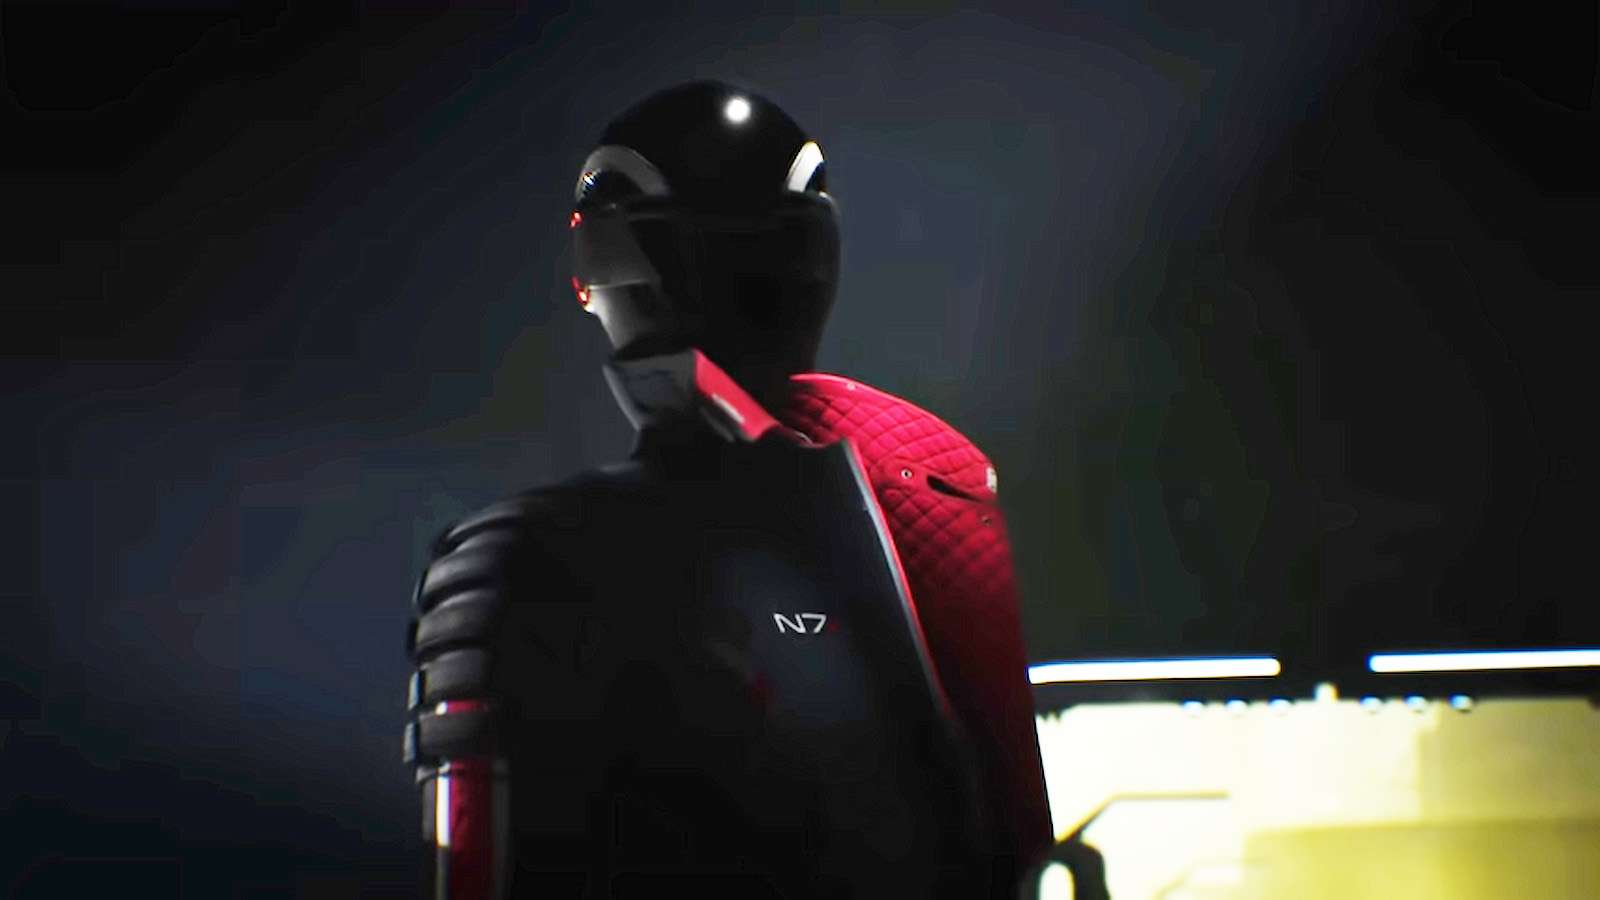 Mystery new Mass Effect character wearing an N7 jacket